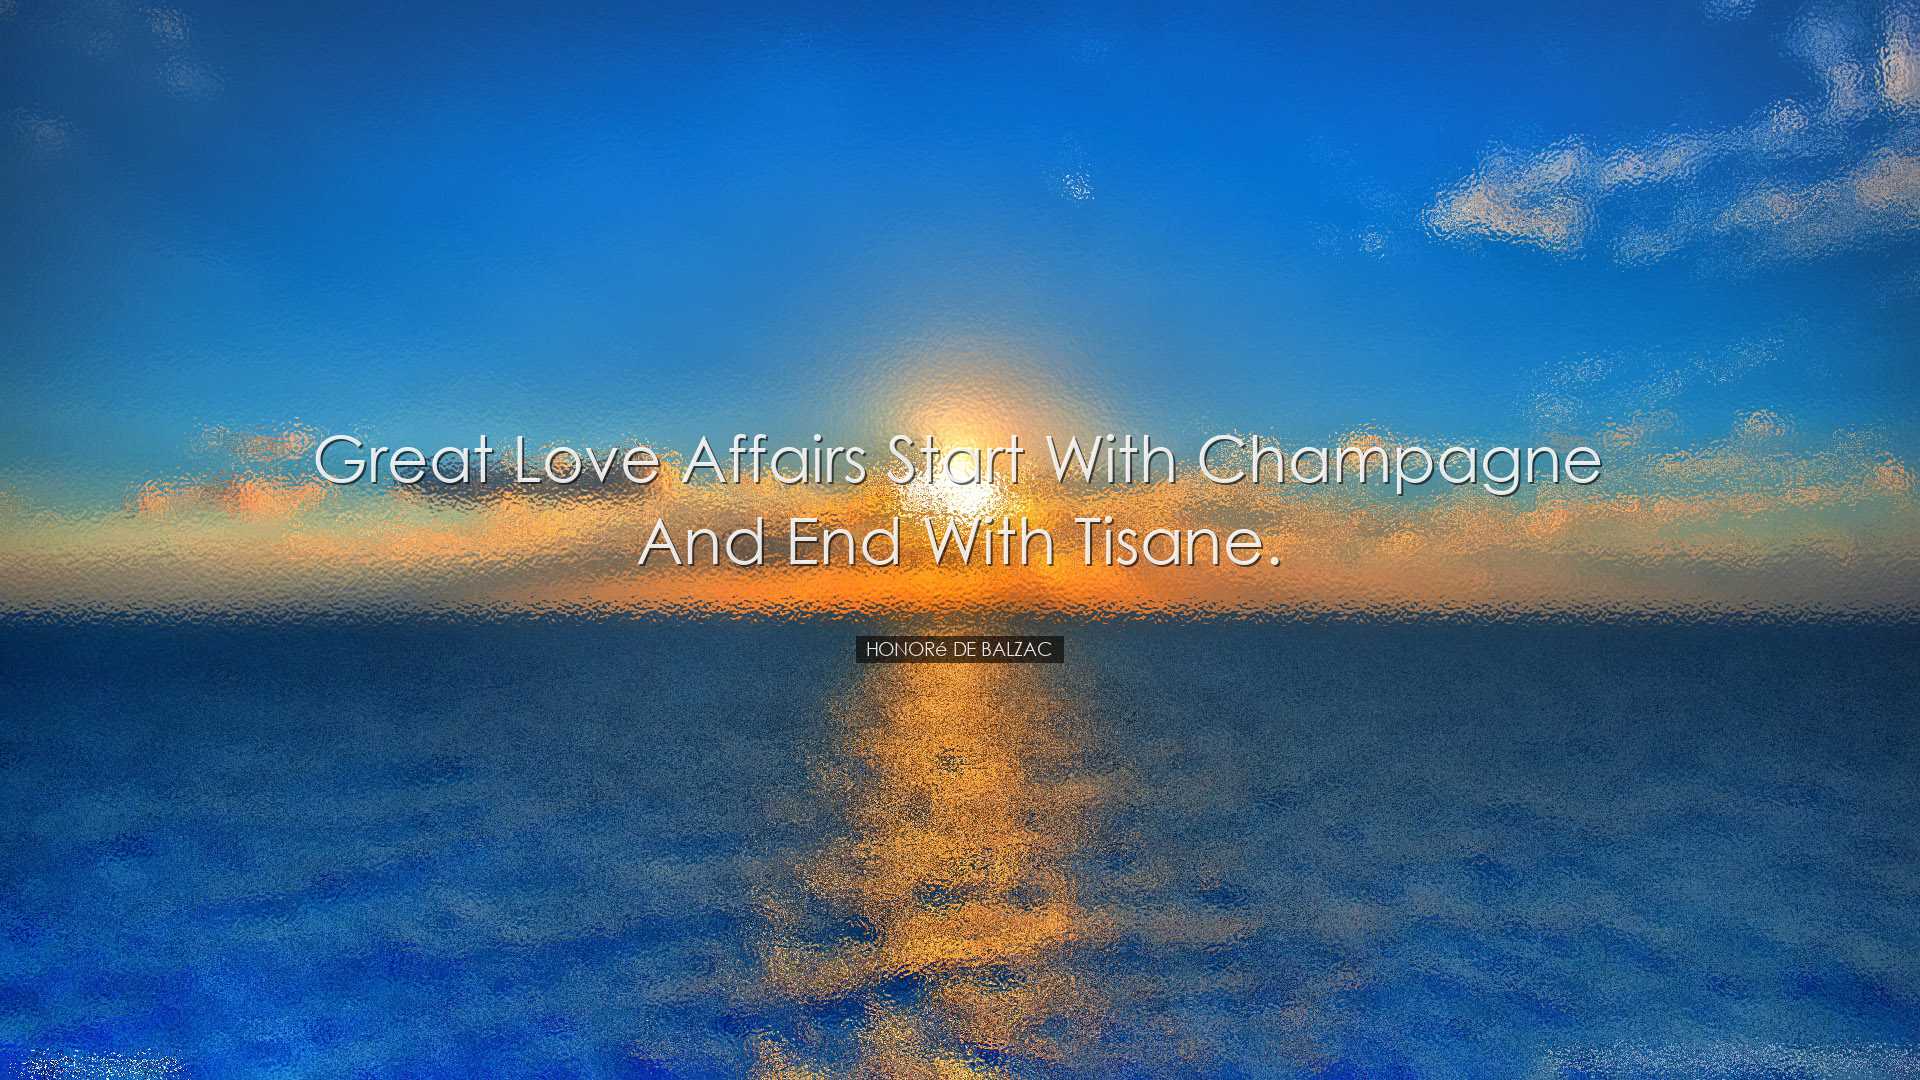 Great love affairs start with Champagne and end with tisane. - Hon